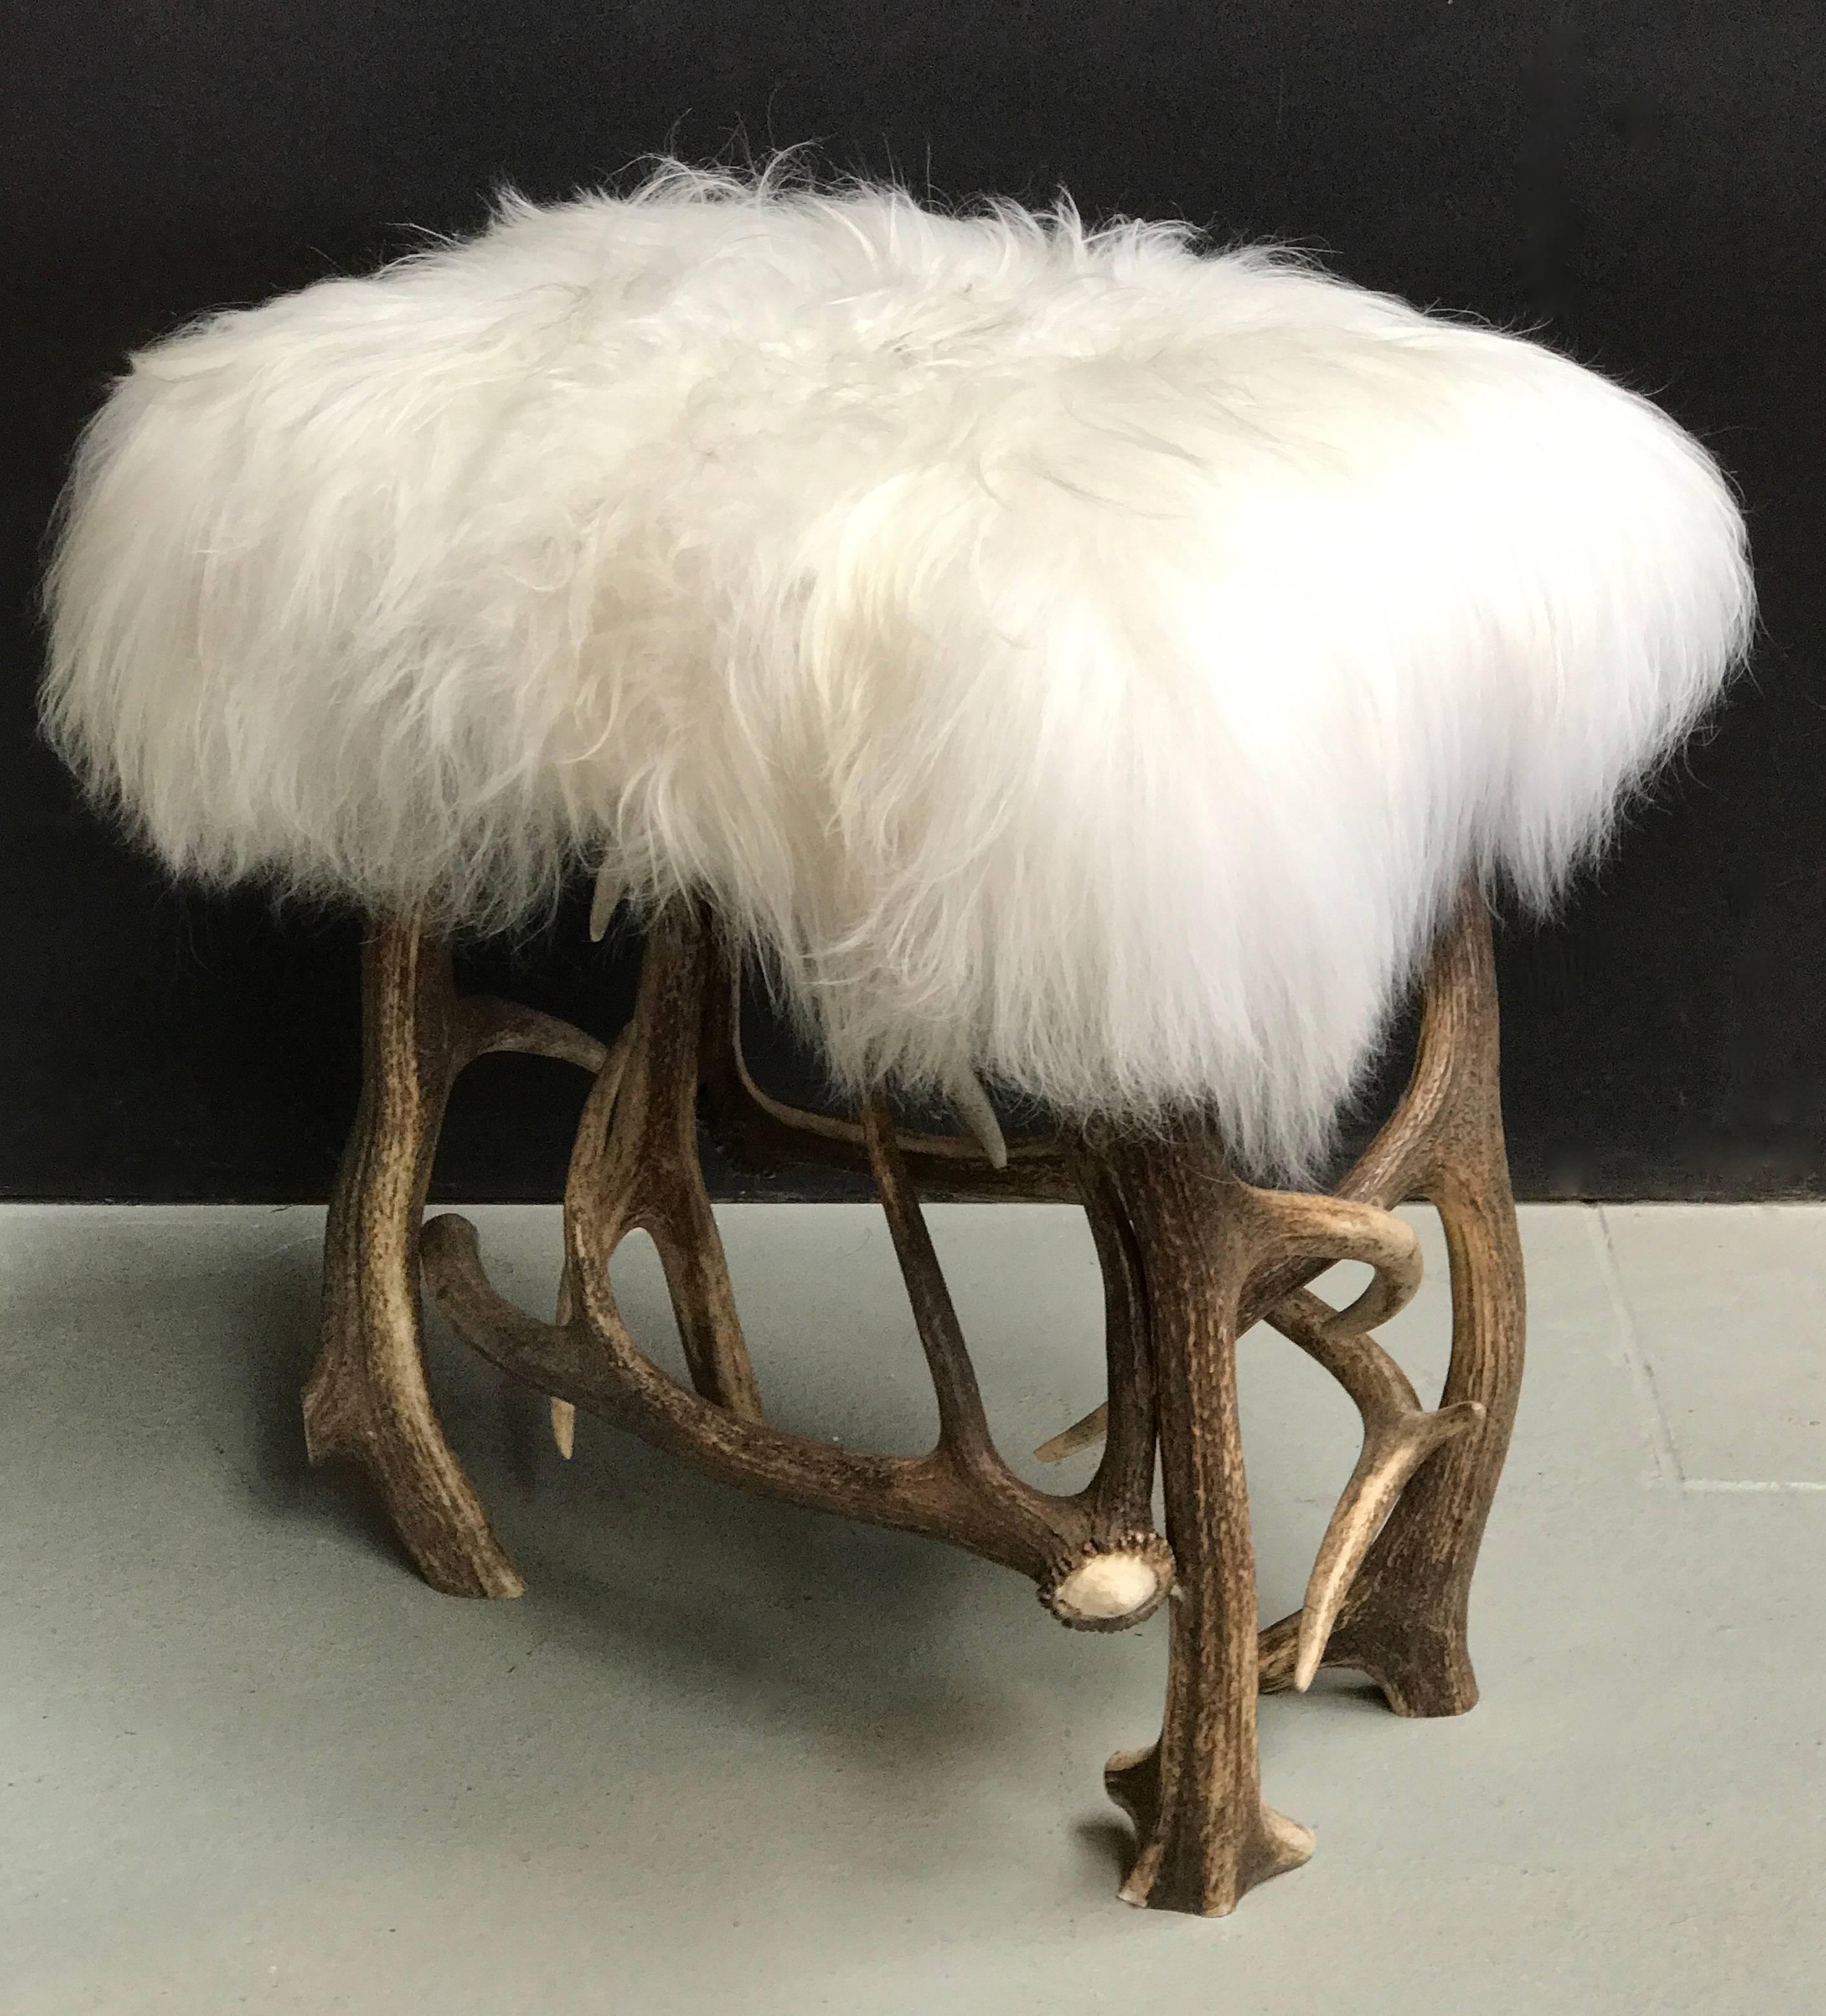 Stool made of red deer antlers upholstered with fluffy snow white Iceland sheep skin.